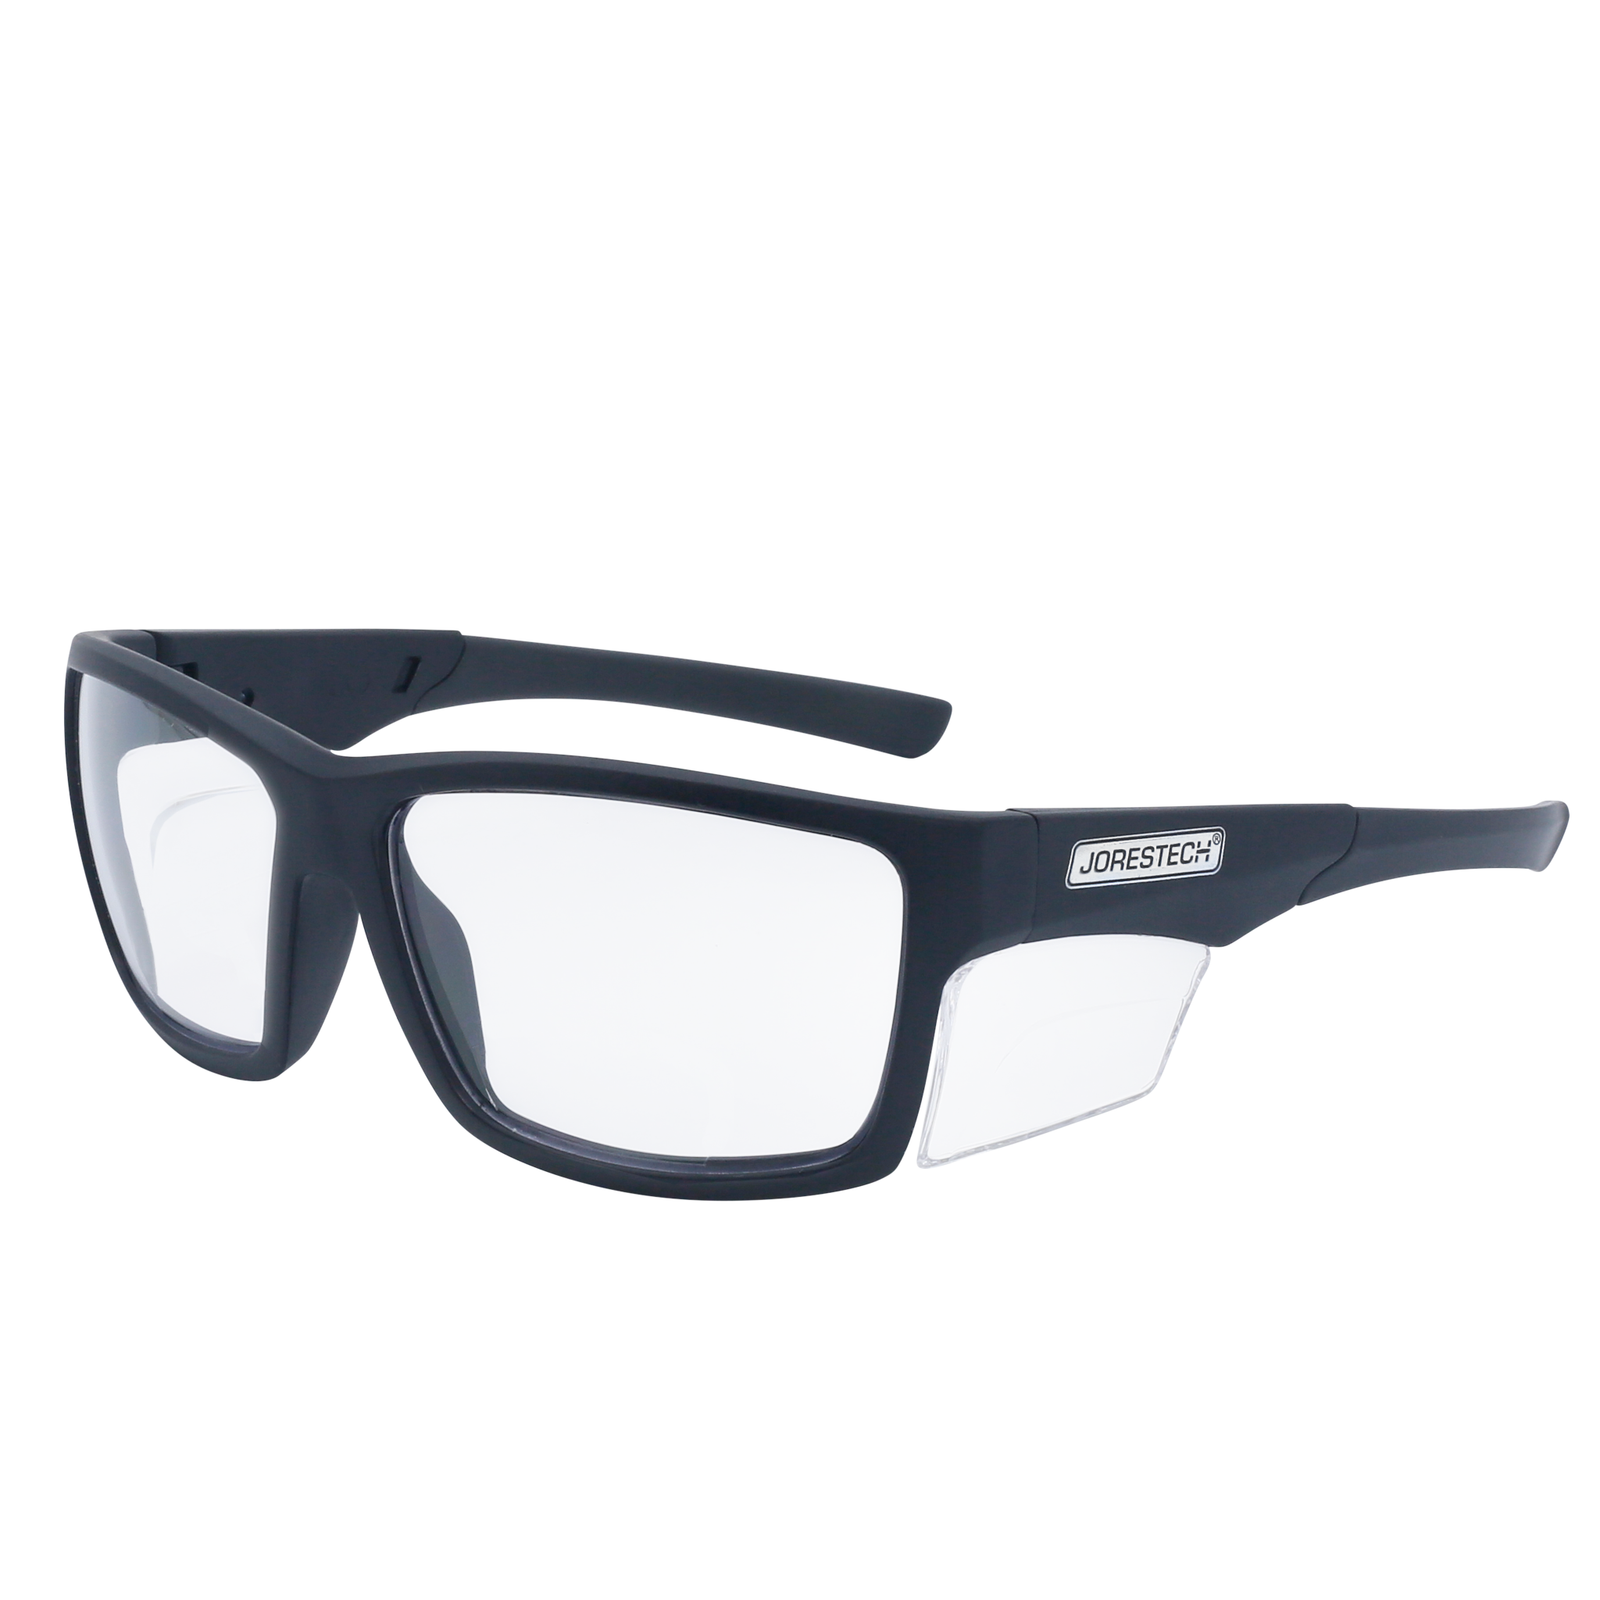 Image shows a diagonal view of a JORESTECH safety clear Glass with transparent side shield for high impact protection. These safety glasses are ANSI compliant and have black frame and clear polycarbonate lenses. The background of the image is white